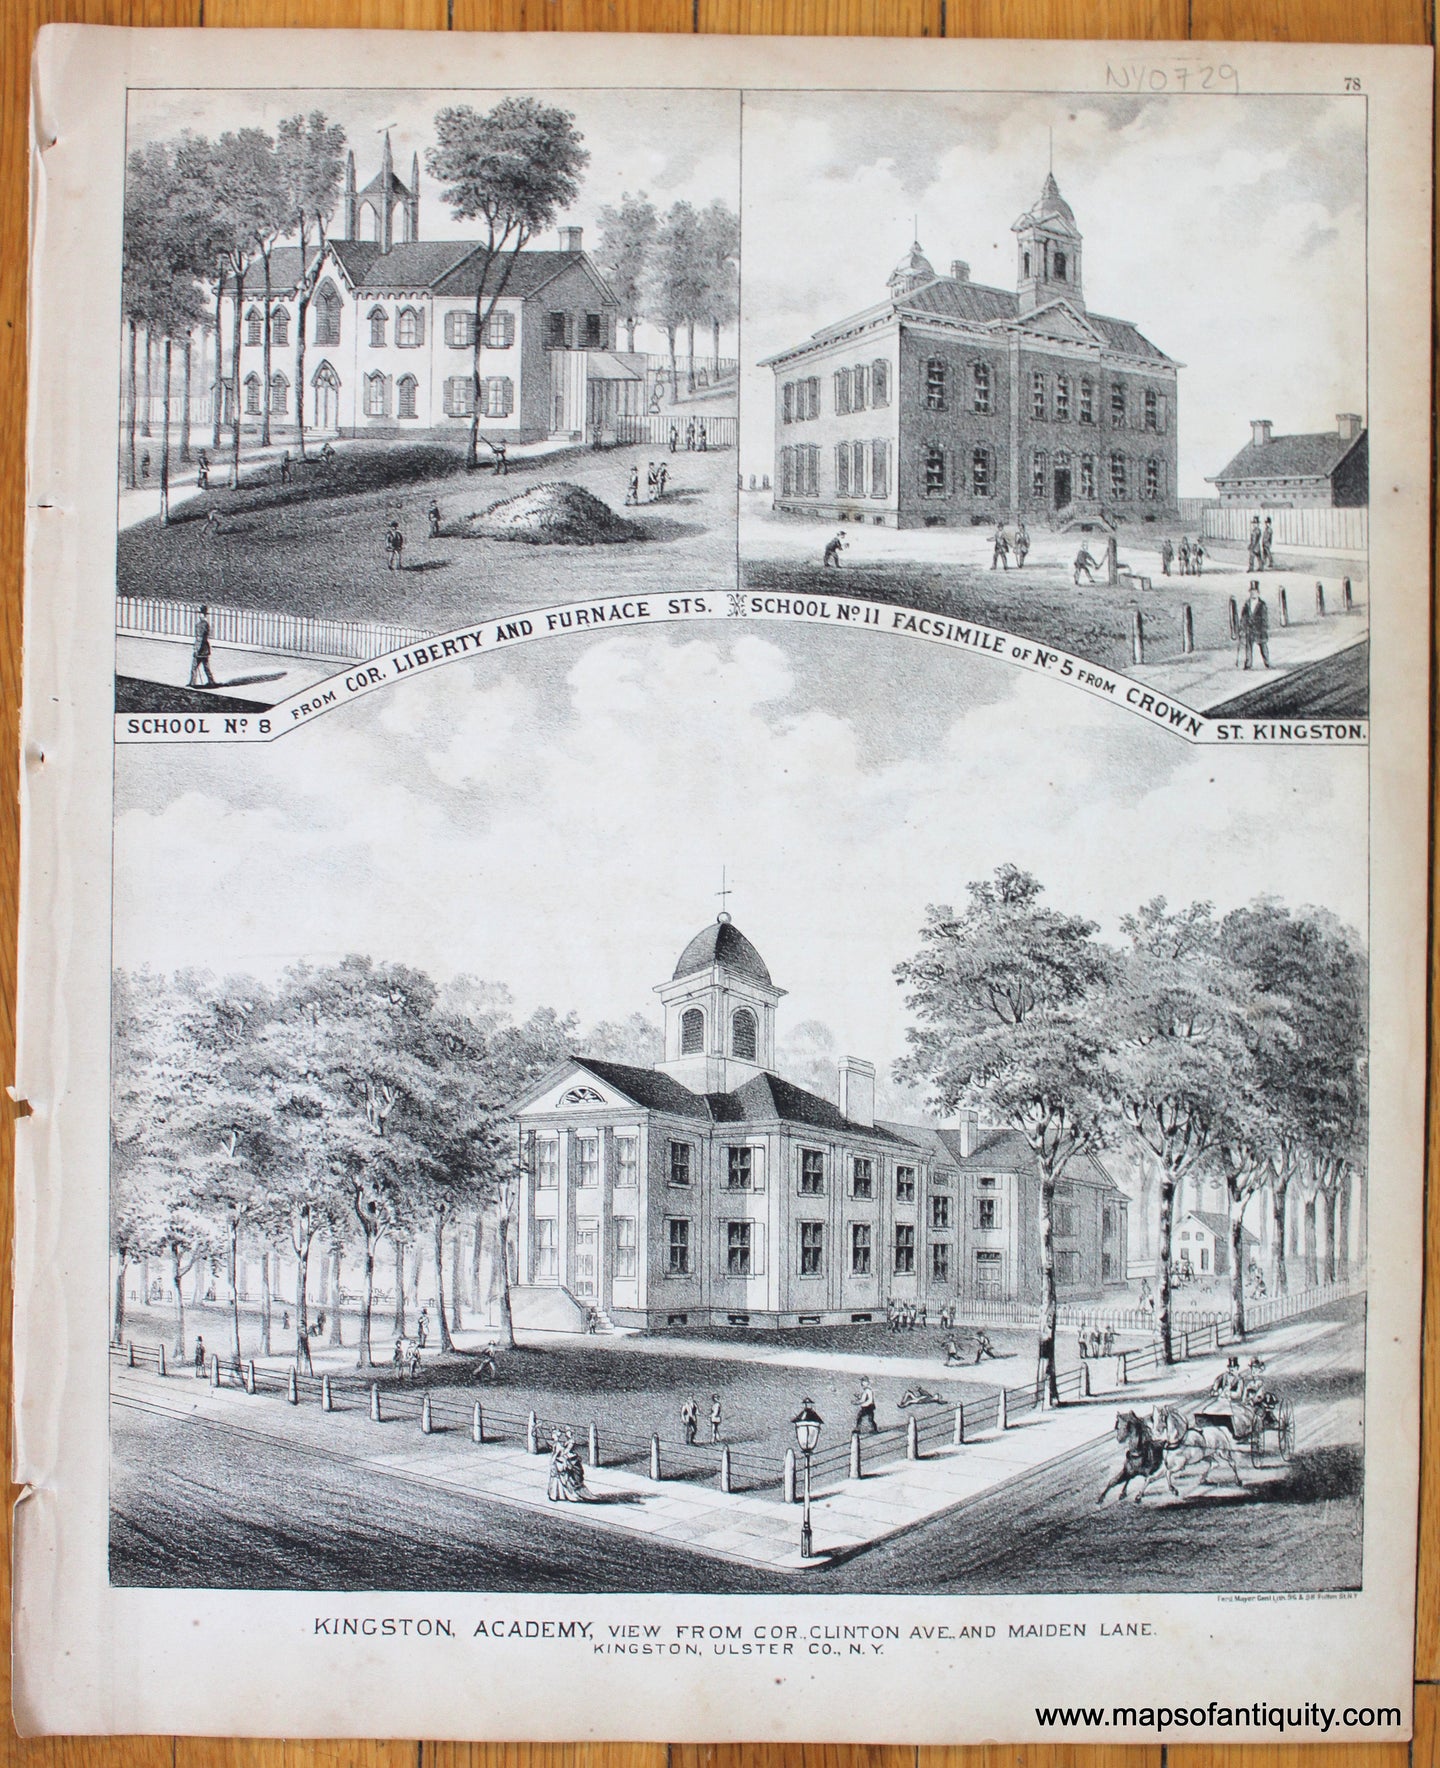 Schools-No.-8-and-11-Kingston-Academy-Ulster-County-New-York-1875-Beers-1870s-1800s-19th-century-antique-Maps-of-Antiquity